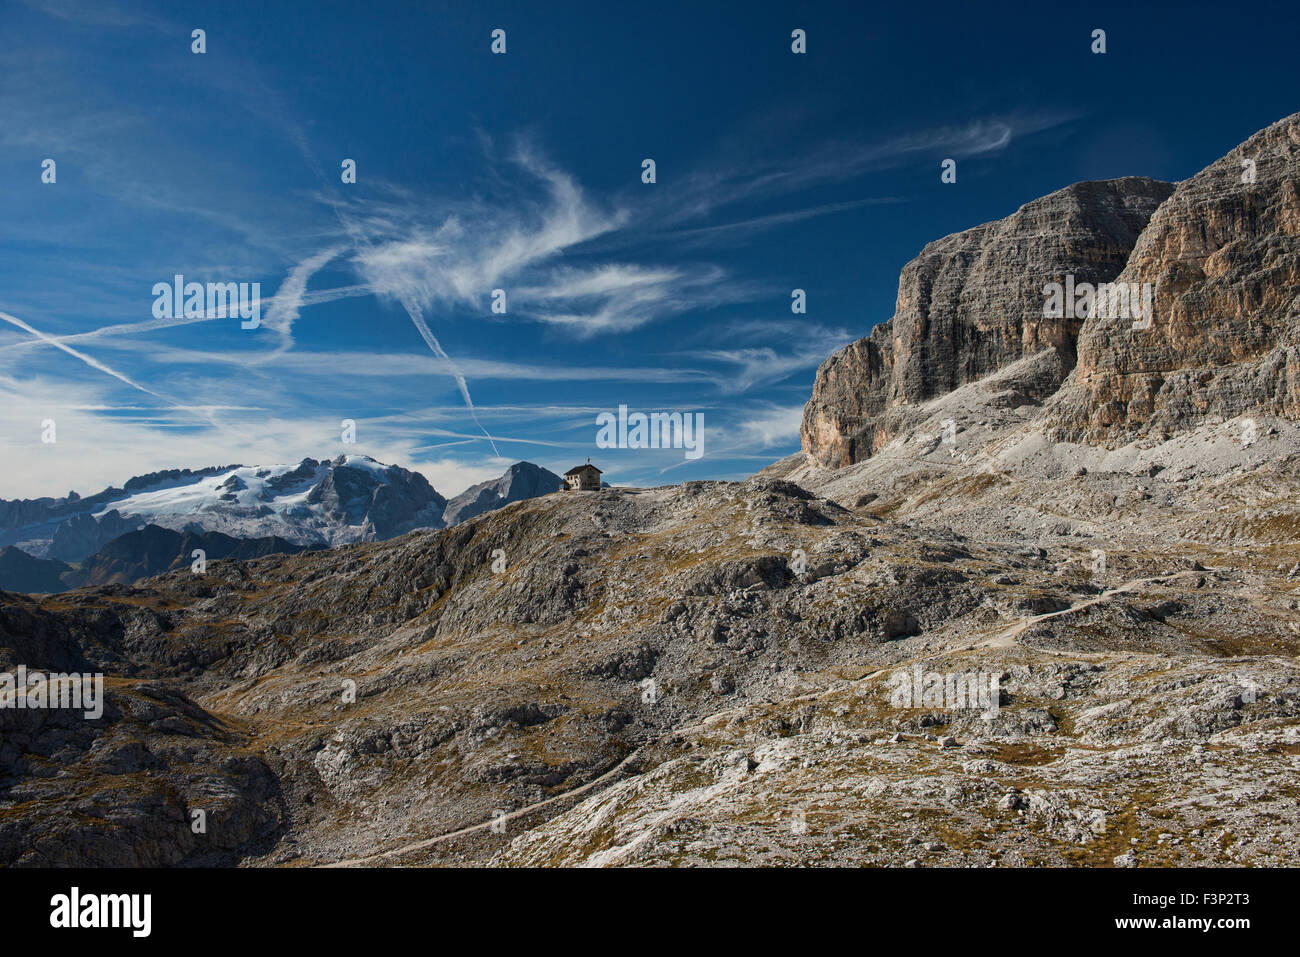 View of Marmolada, Italy's highest peak, and the Franz Kostner Hut in the Dolomites Stock Photo